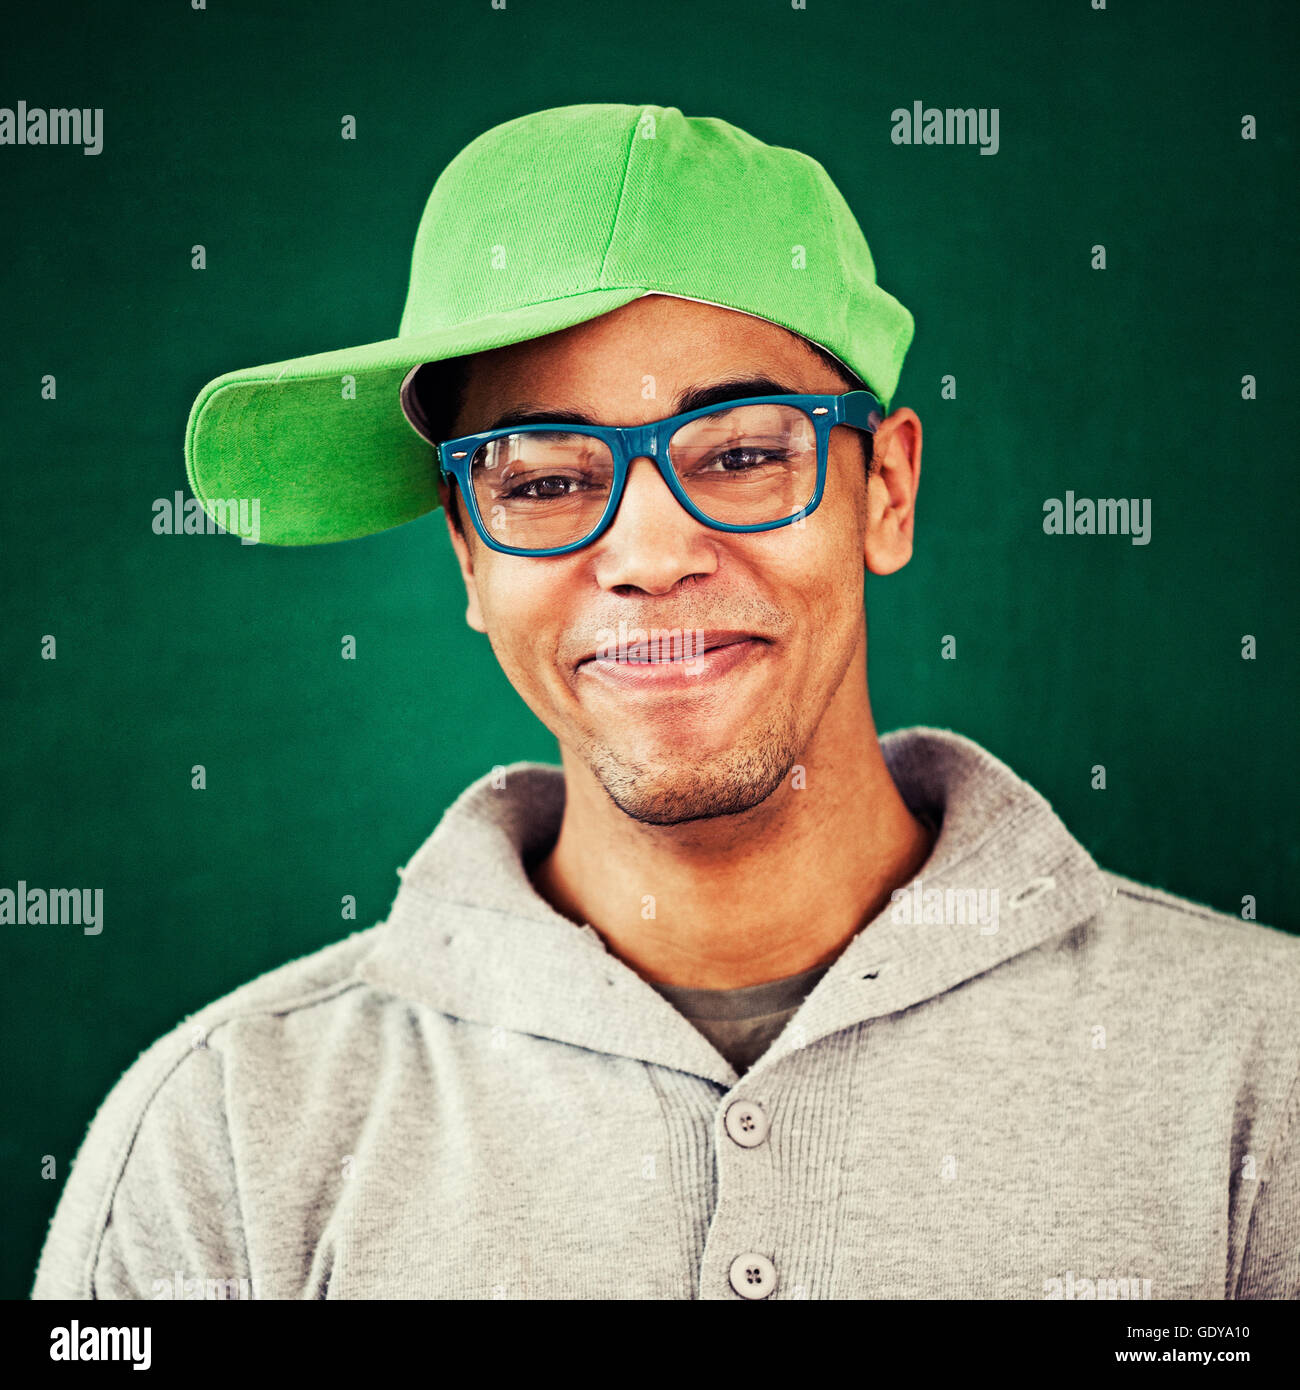 Smiling African rapper wearing a cap and blue glasses. Stock Photo